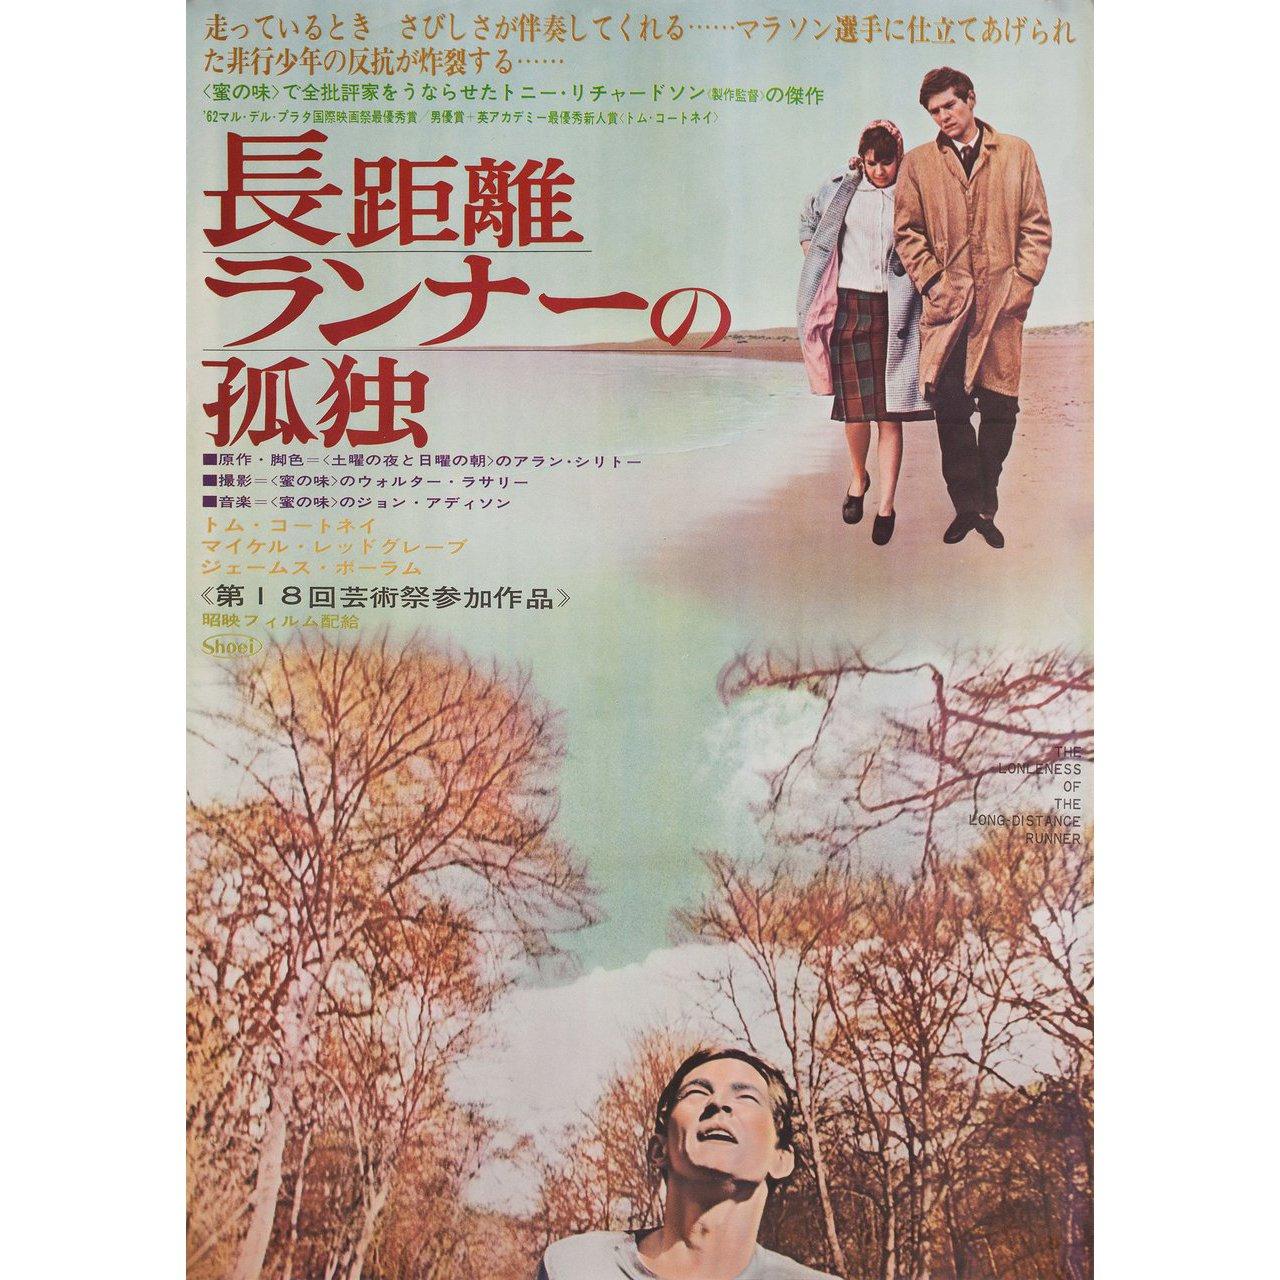 Original 1962 Japanese B2 poster for the film The Loneliness of the Long Distance Runner directed by Tony Richardson with Michael Redgrave / Tom Courtenay / Avis Bunnage / Alec McCowen. Very Good-Fine condition, folded. Many original posters were